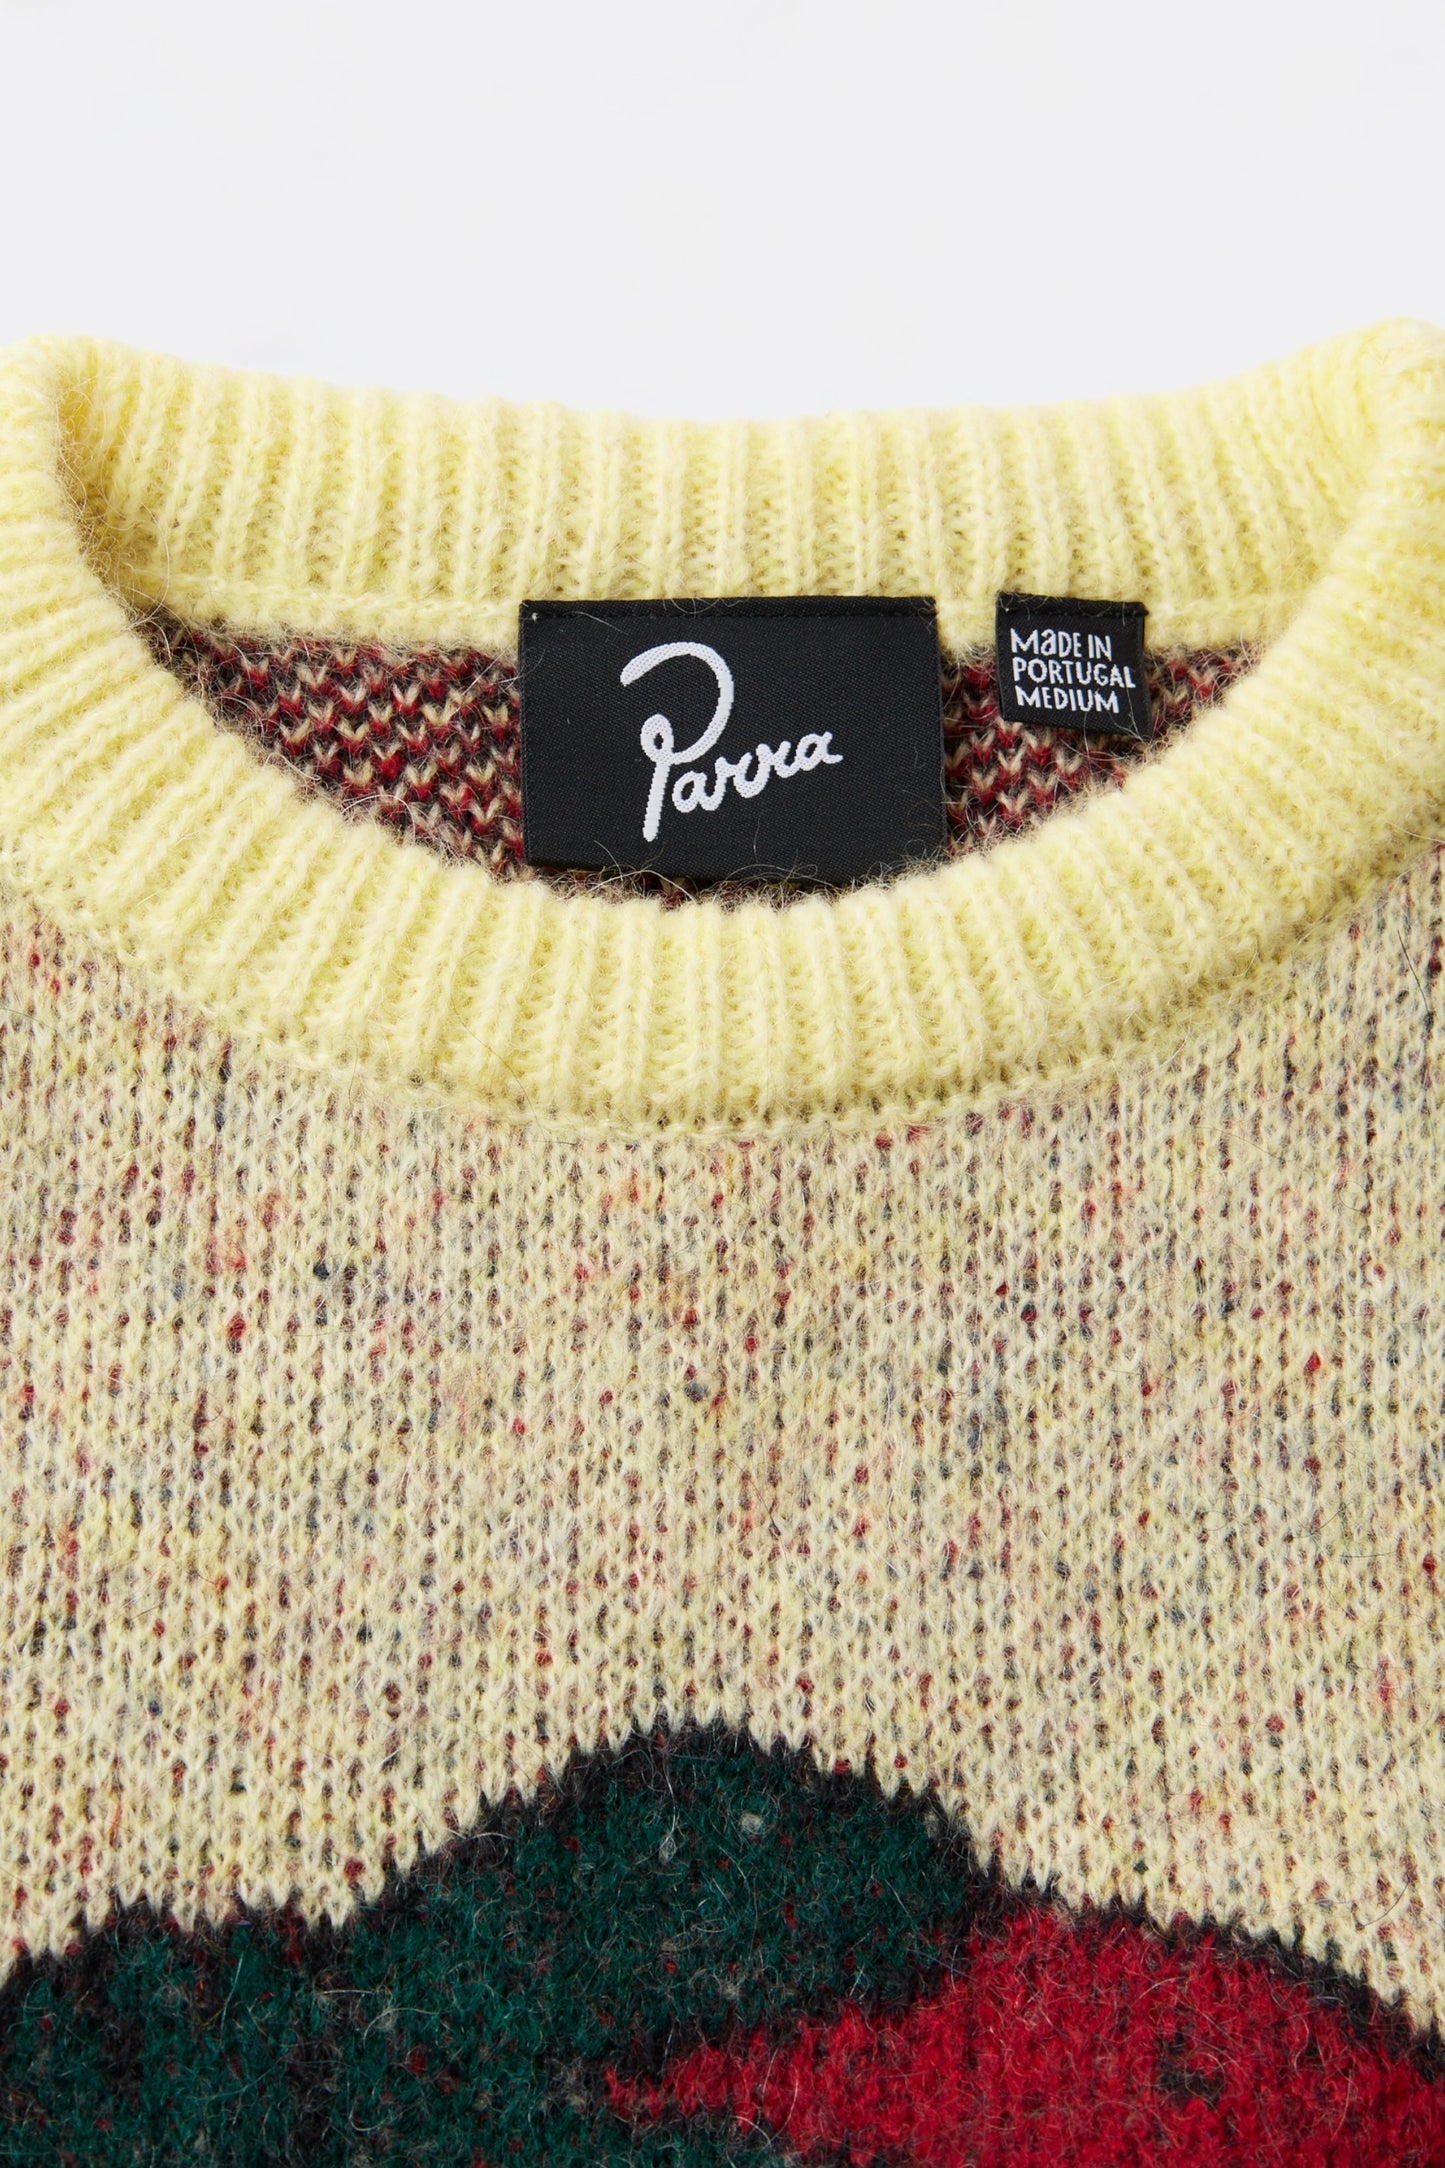 Parra - Stupid Strawberry Knitted Pullover (Yellow)